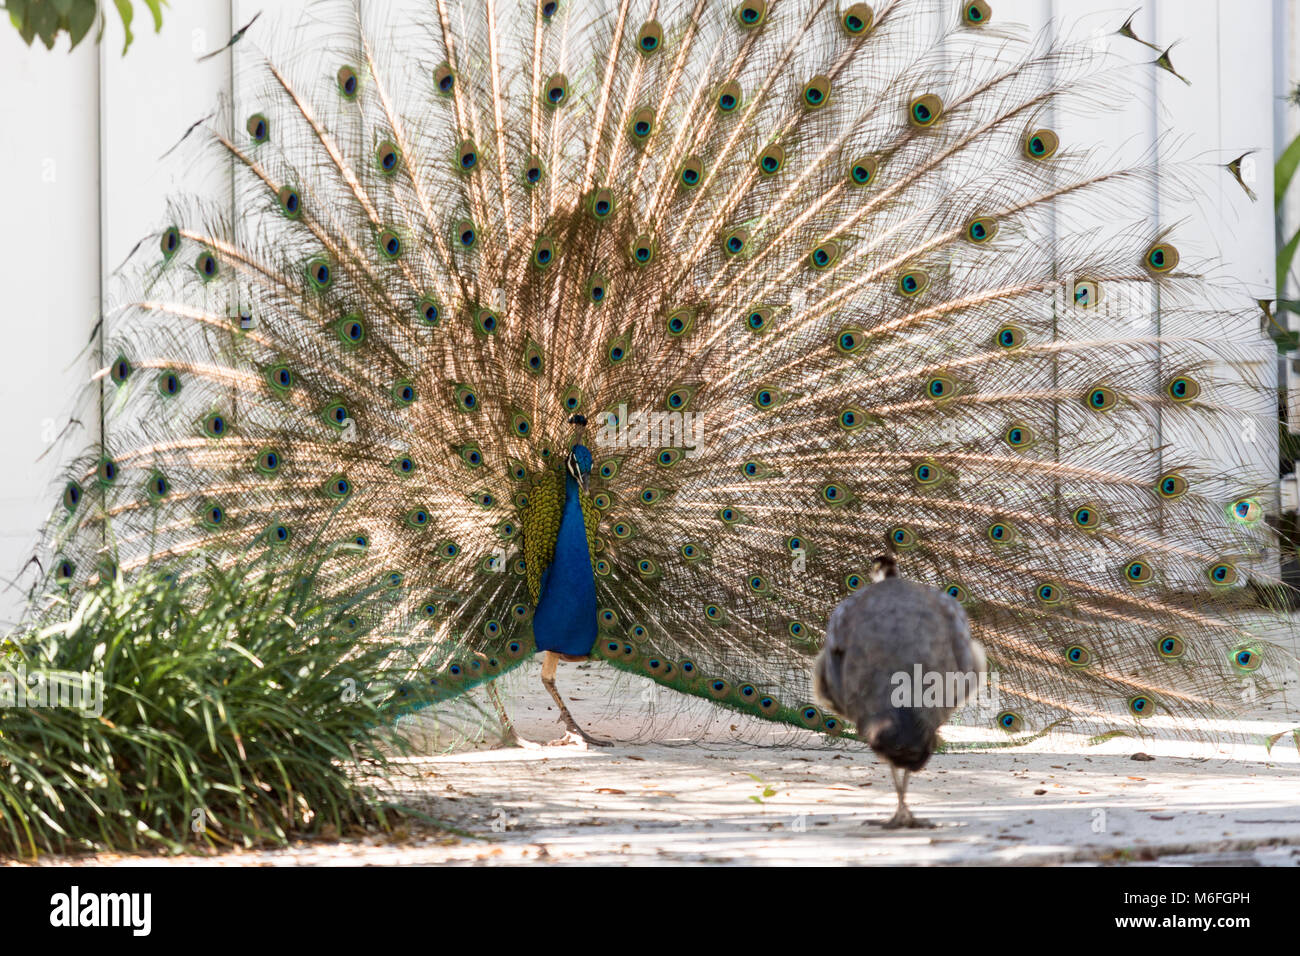 03 March 2018 - Coconut Grove, Flordia, USA: A Peacock puts on a display for a passing Peahen during mating season on a residential street Stock Photo